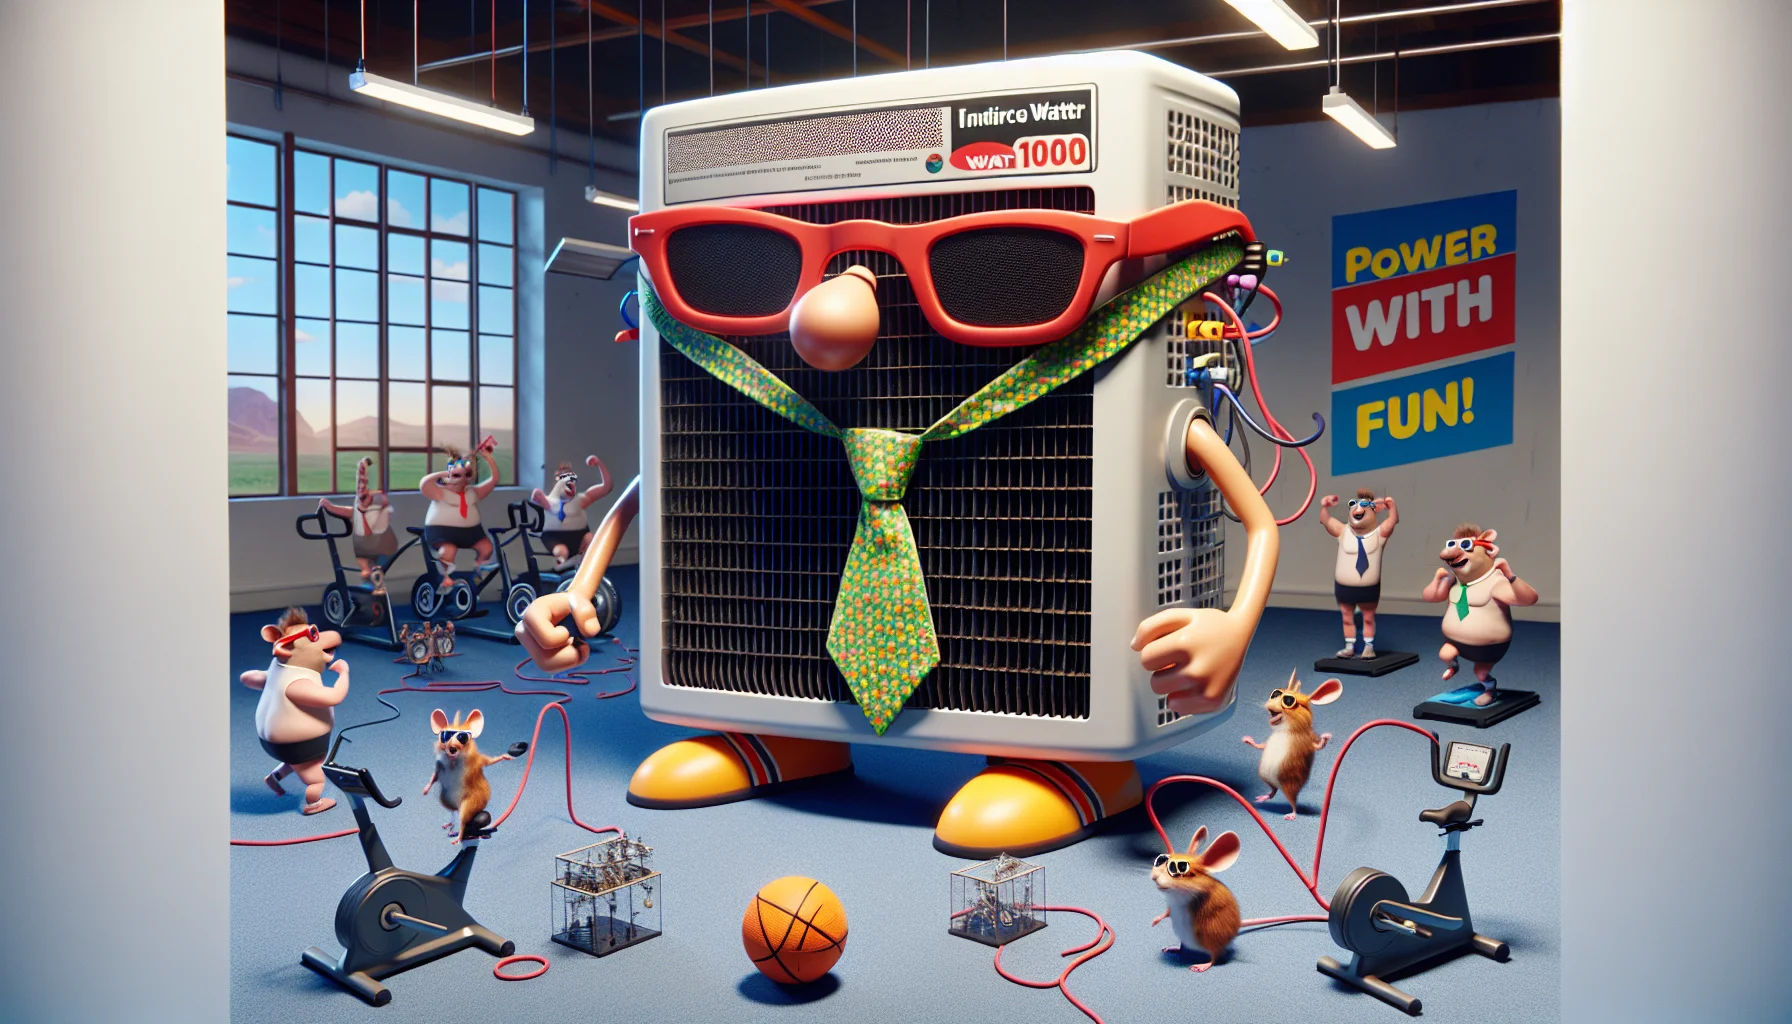 Create an unexpected and humorous scene with a large, powerful 10,000 Watt Filter as the central character. Picture this machine adorned with cartoonish sunglasses and a vibrant tie, as if it's playfully dressed up for an office party. Around it, animate a variety of activities that one might typically associate with electricity generation, such as exercise bikes connected with wires, or hamsters running on wheels powering miniature light bulbs. The mood should be light-hearted and jovoyant. The background could include a bold slogan like 'Power up with Fun!' to attract attention and generate excitement about electricity generation.